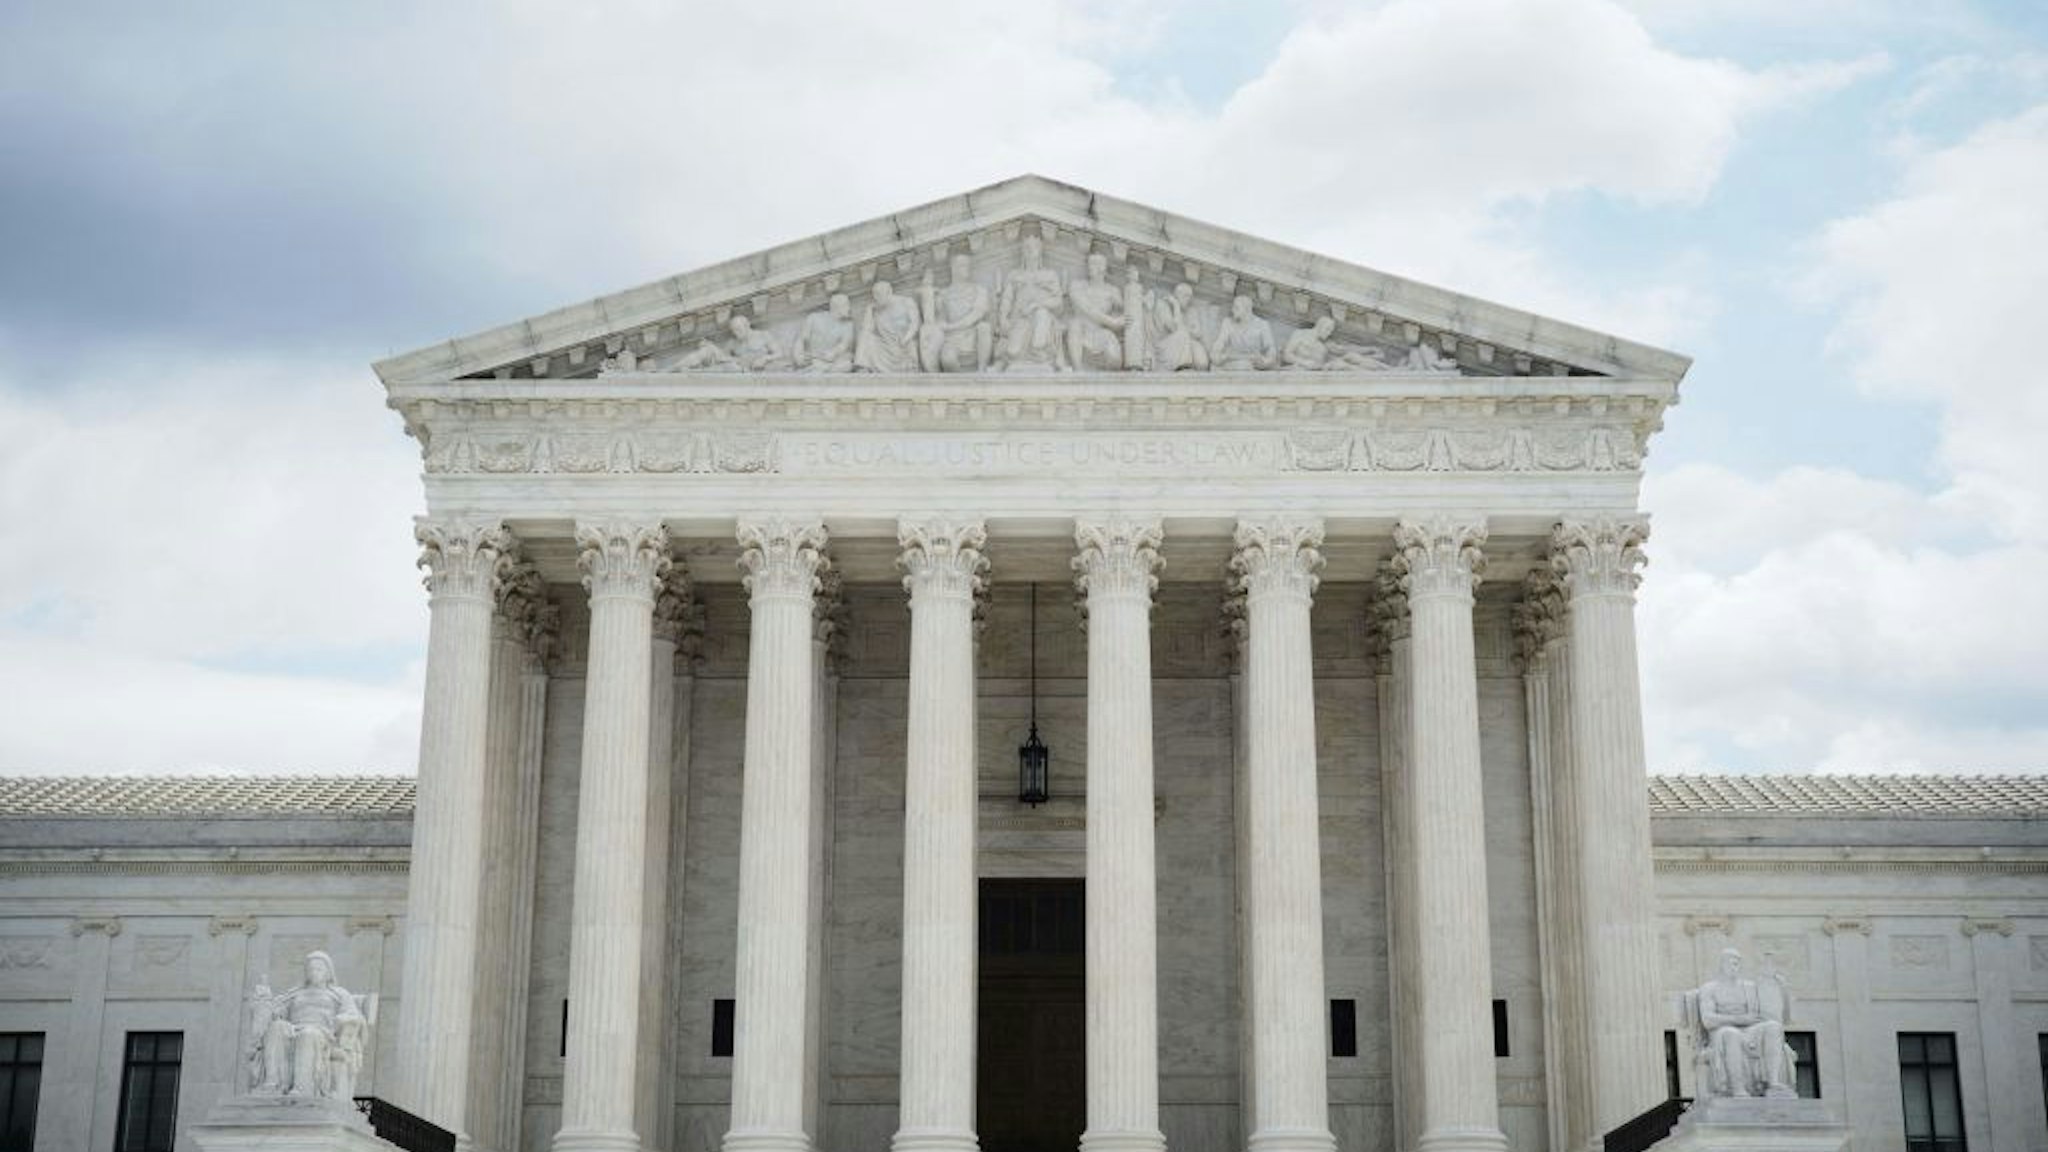 The US Supreme Court is seen in Washington, DC on July 1, 2021.